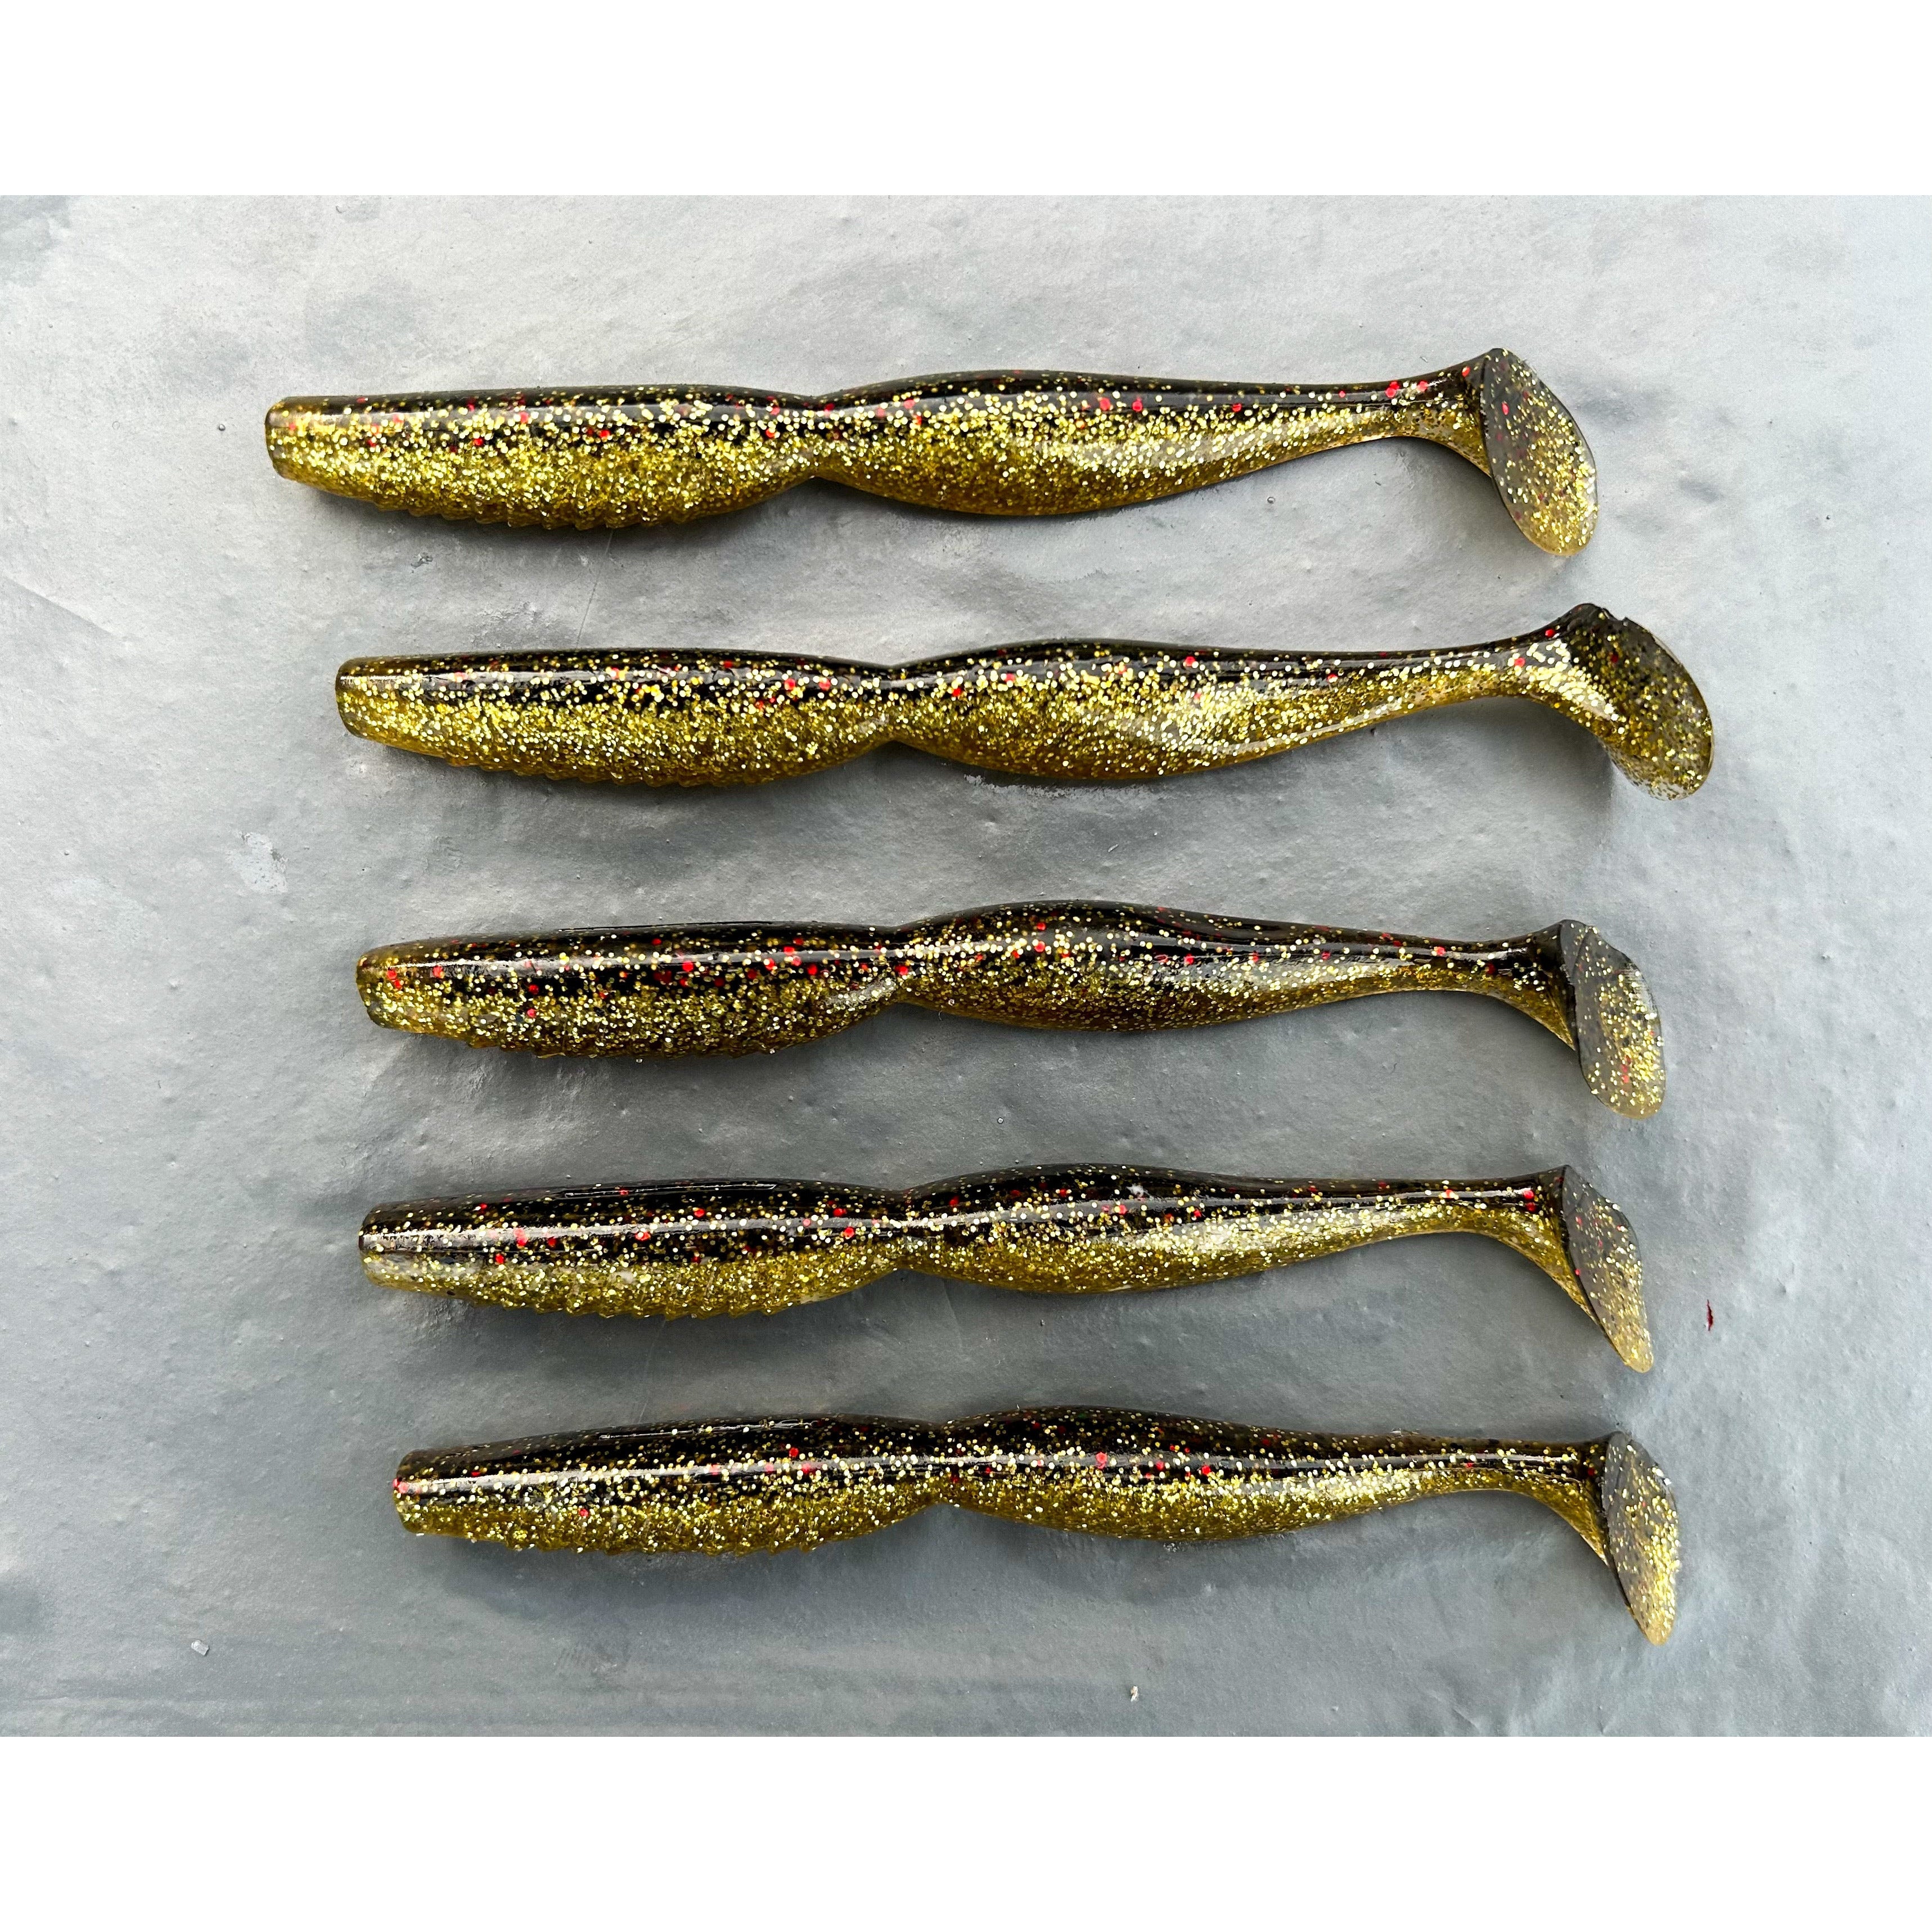 5” Spindle Paddletail Spinning Bass Lure Sets